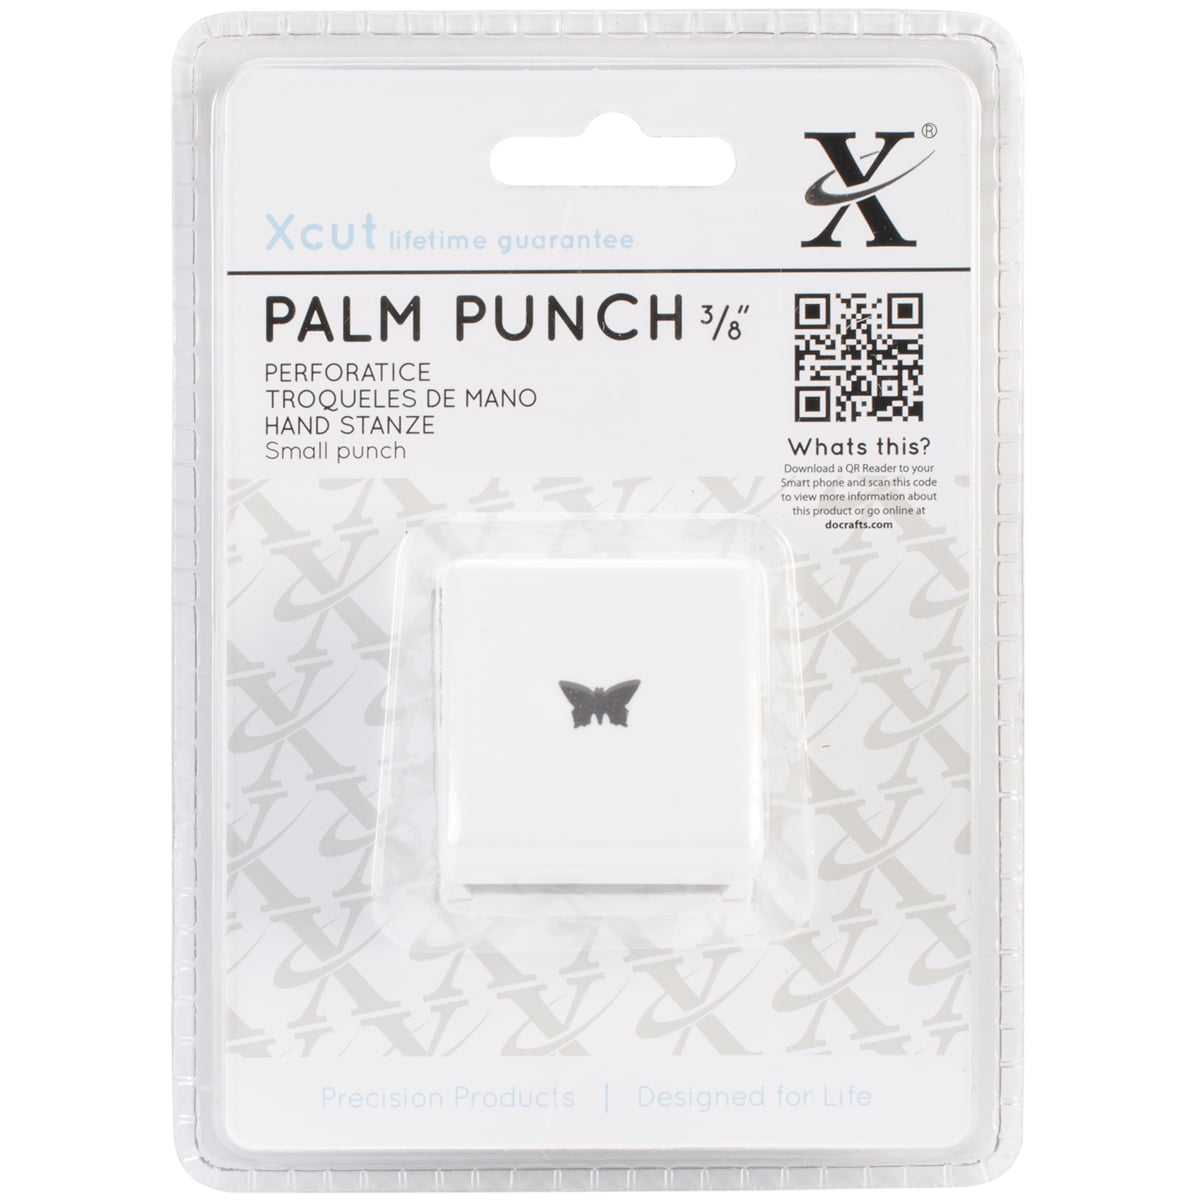 Pointed Butterfly Docrafts Medium Palm Punch